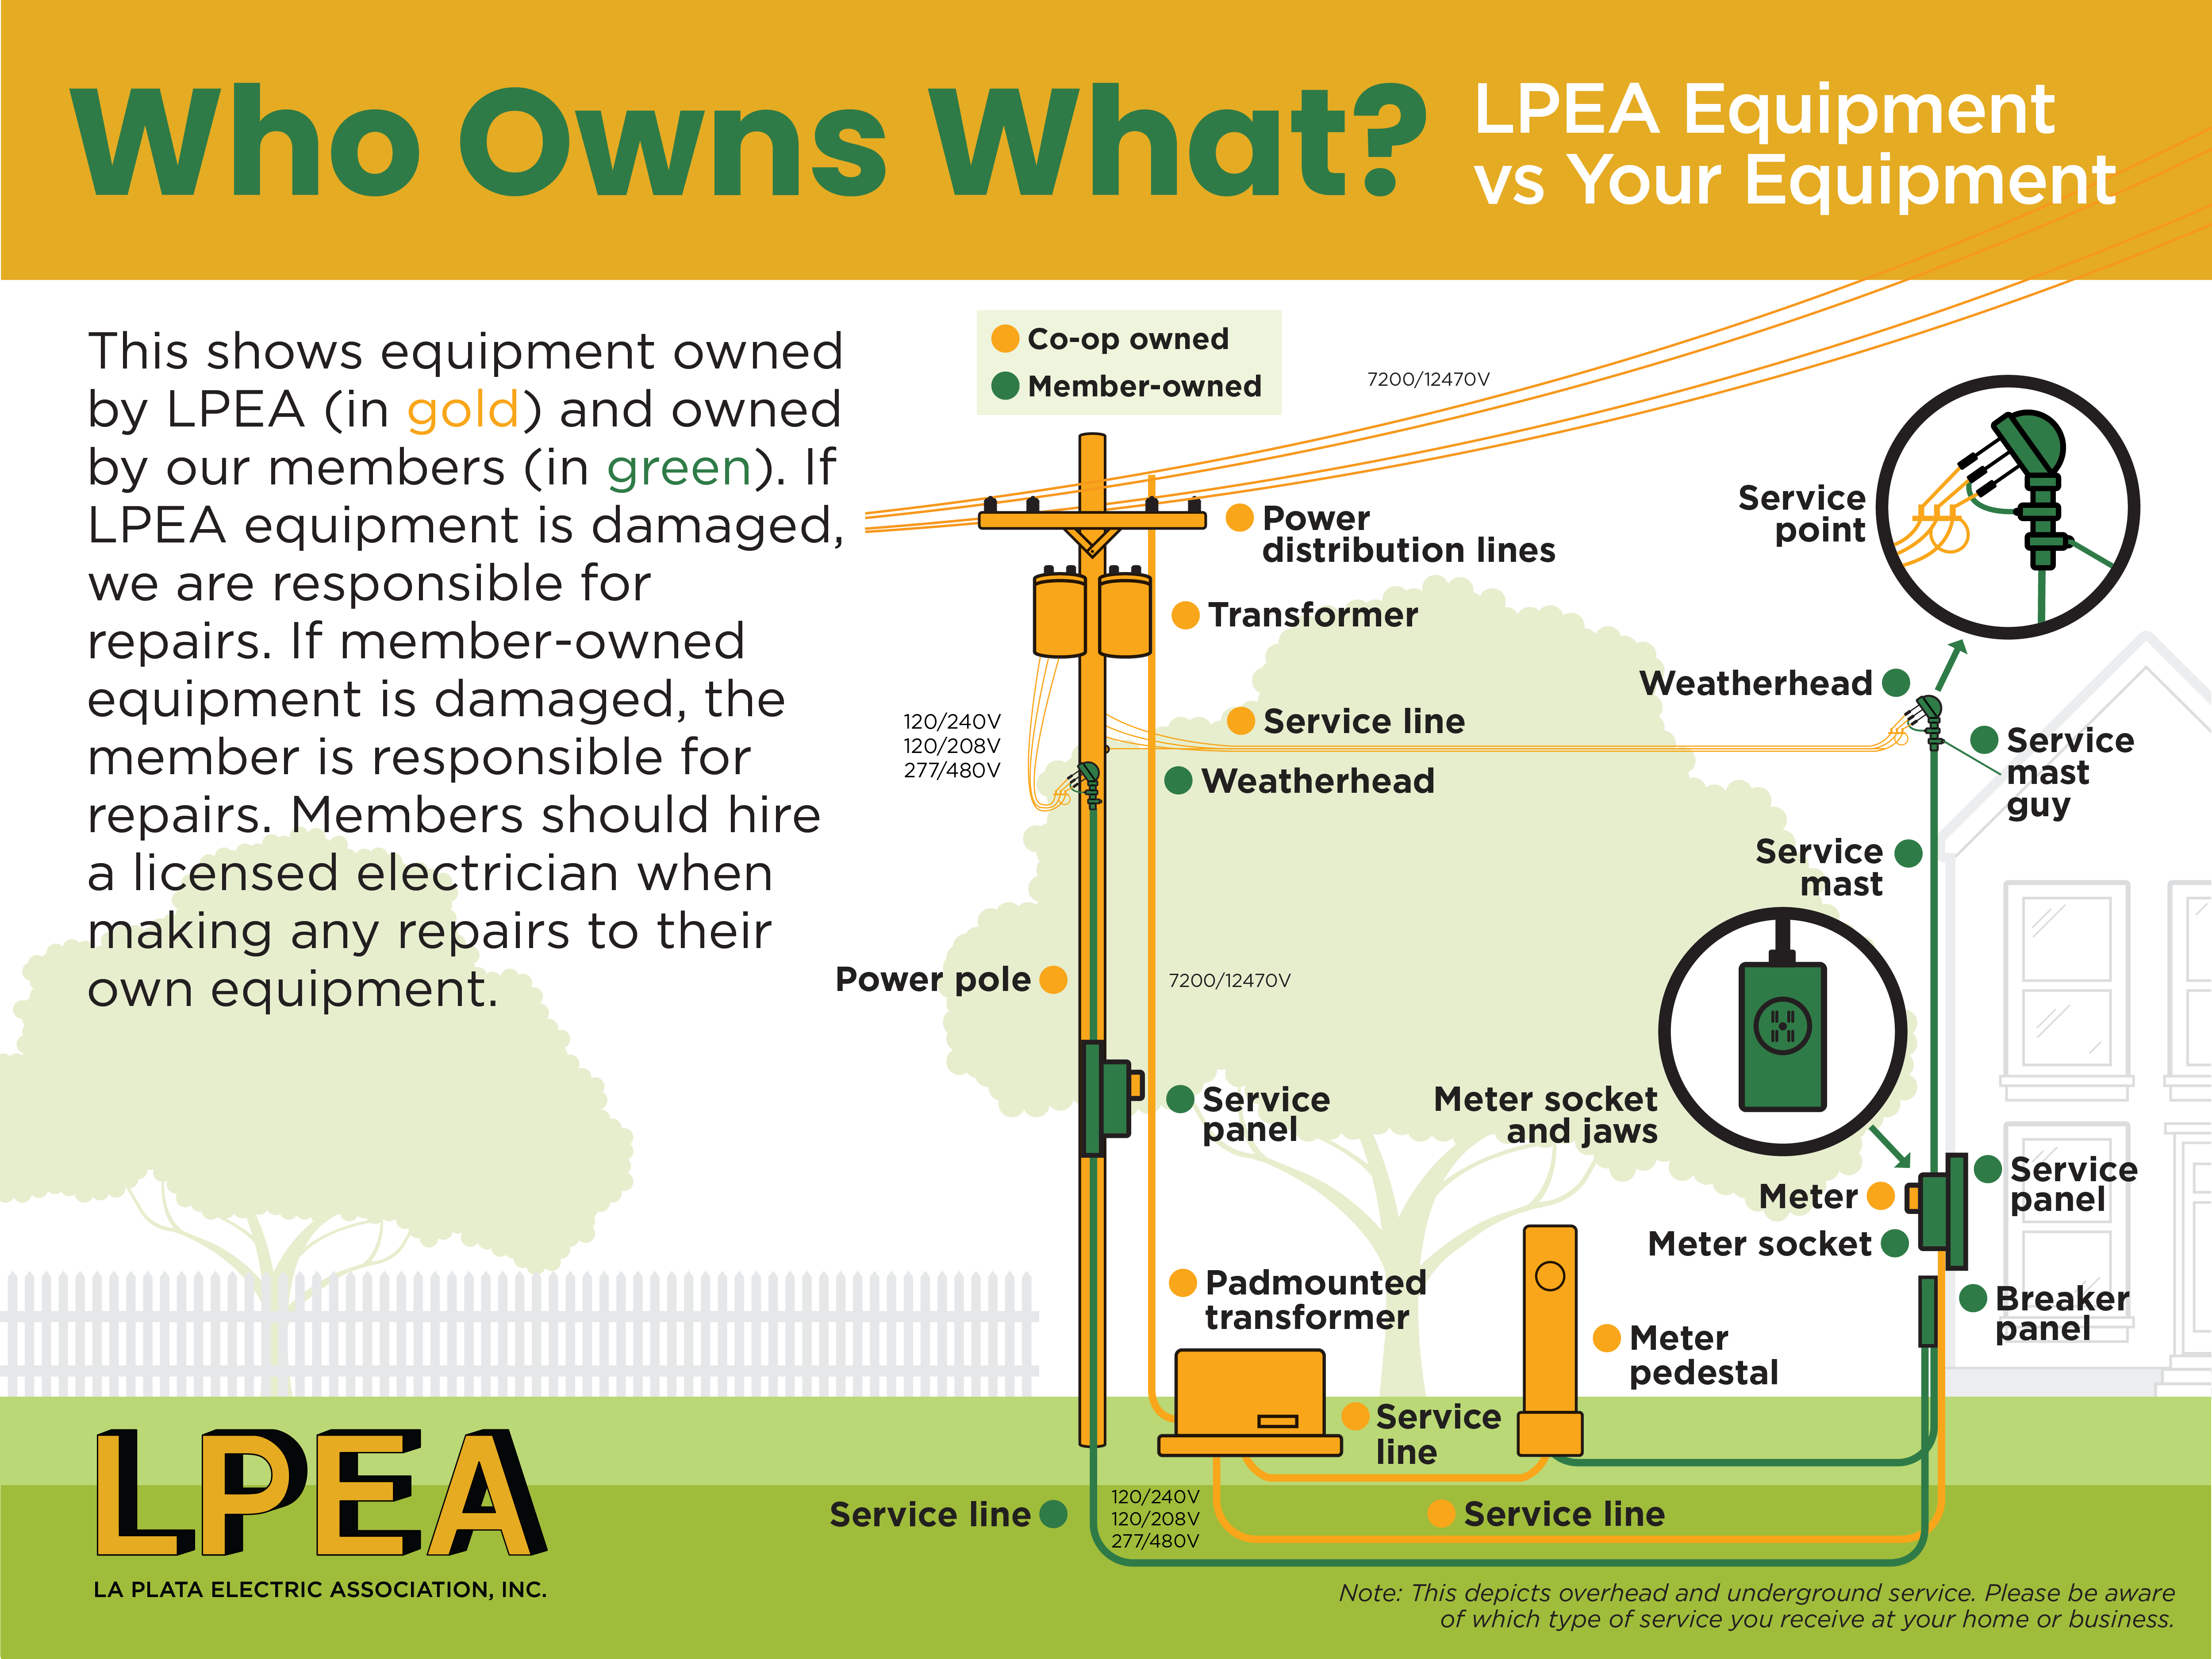 Who Owns What LPEA